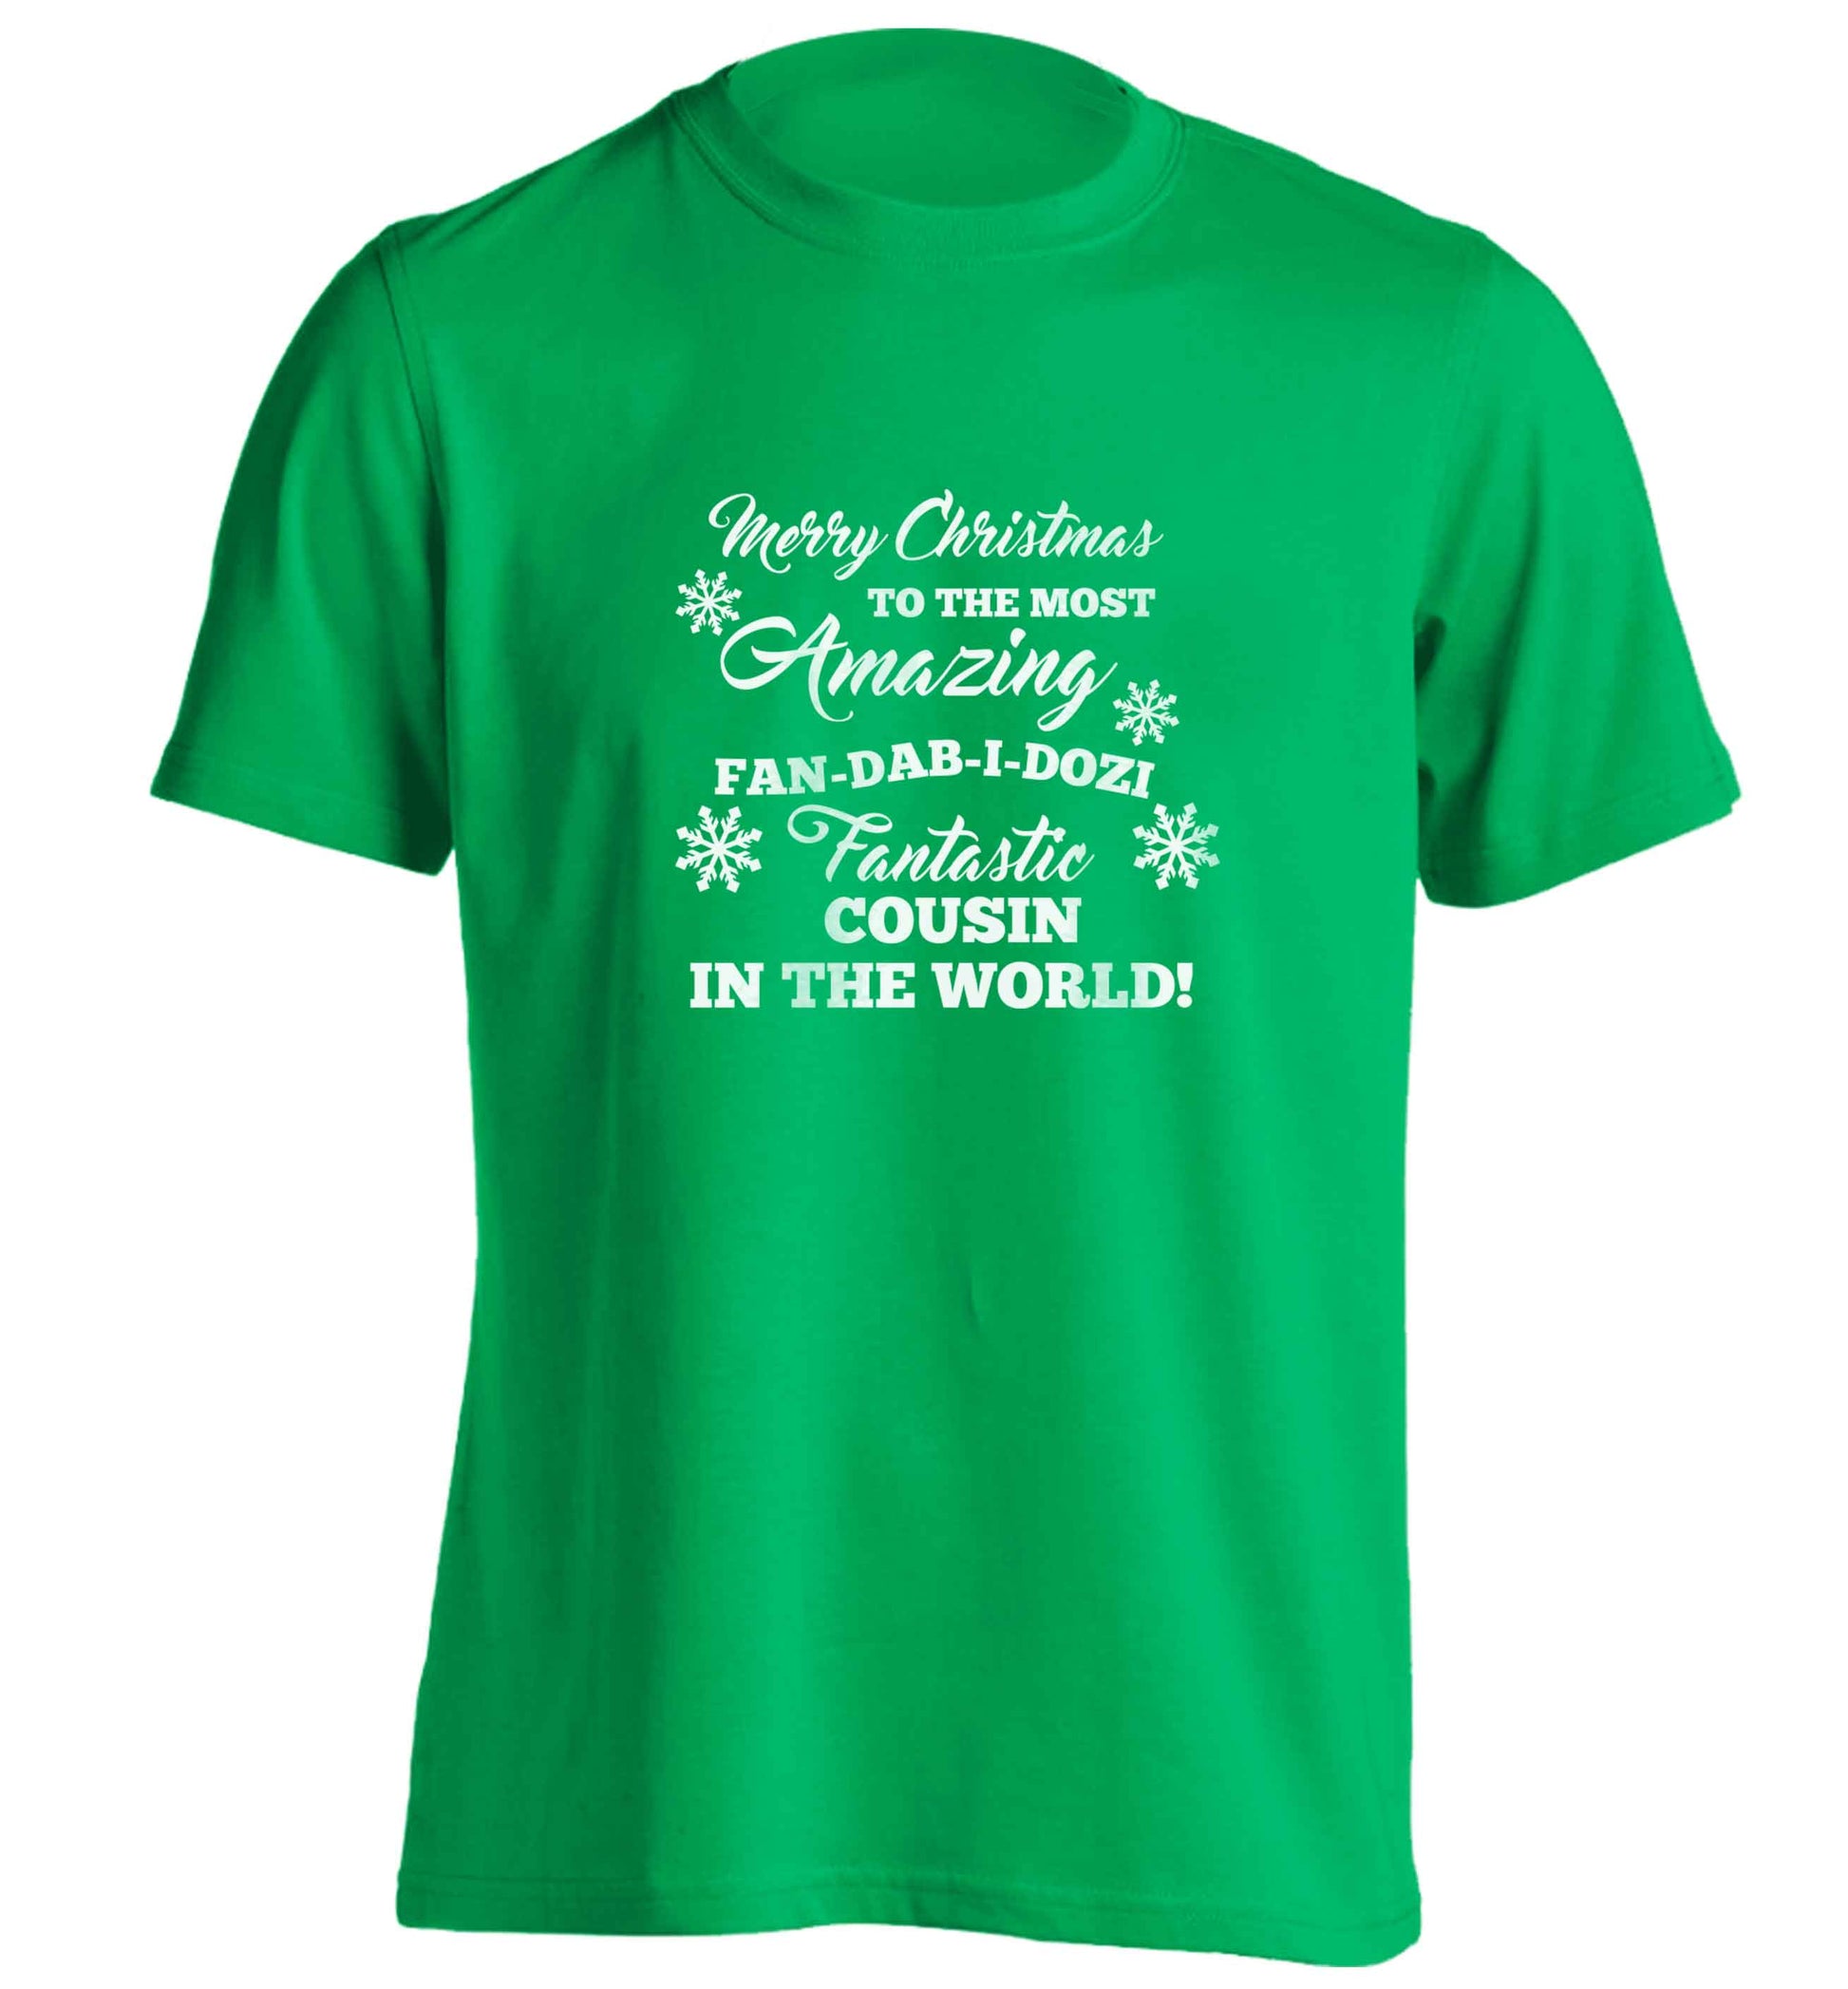 Merry Christmas to the most amazing fan-dab-i-dozi fantasic Cousin in the world adults unisex green Tshirt 2XL